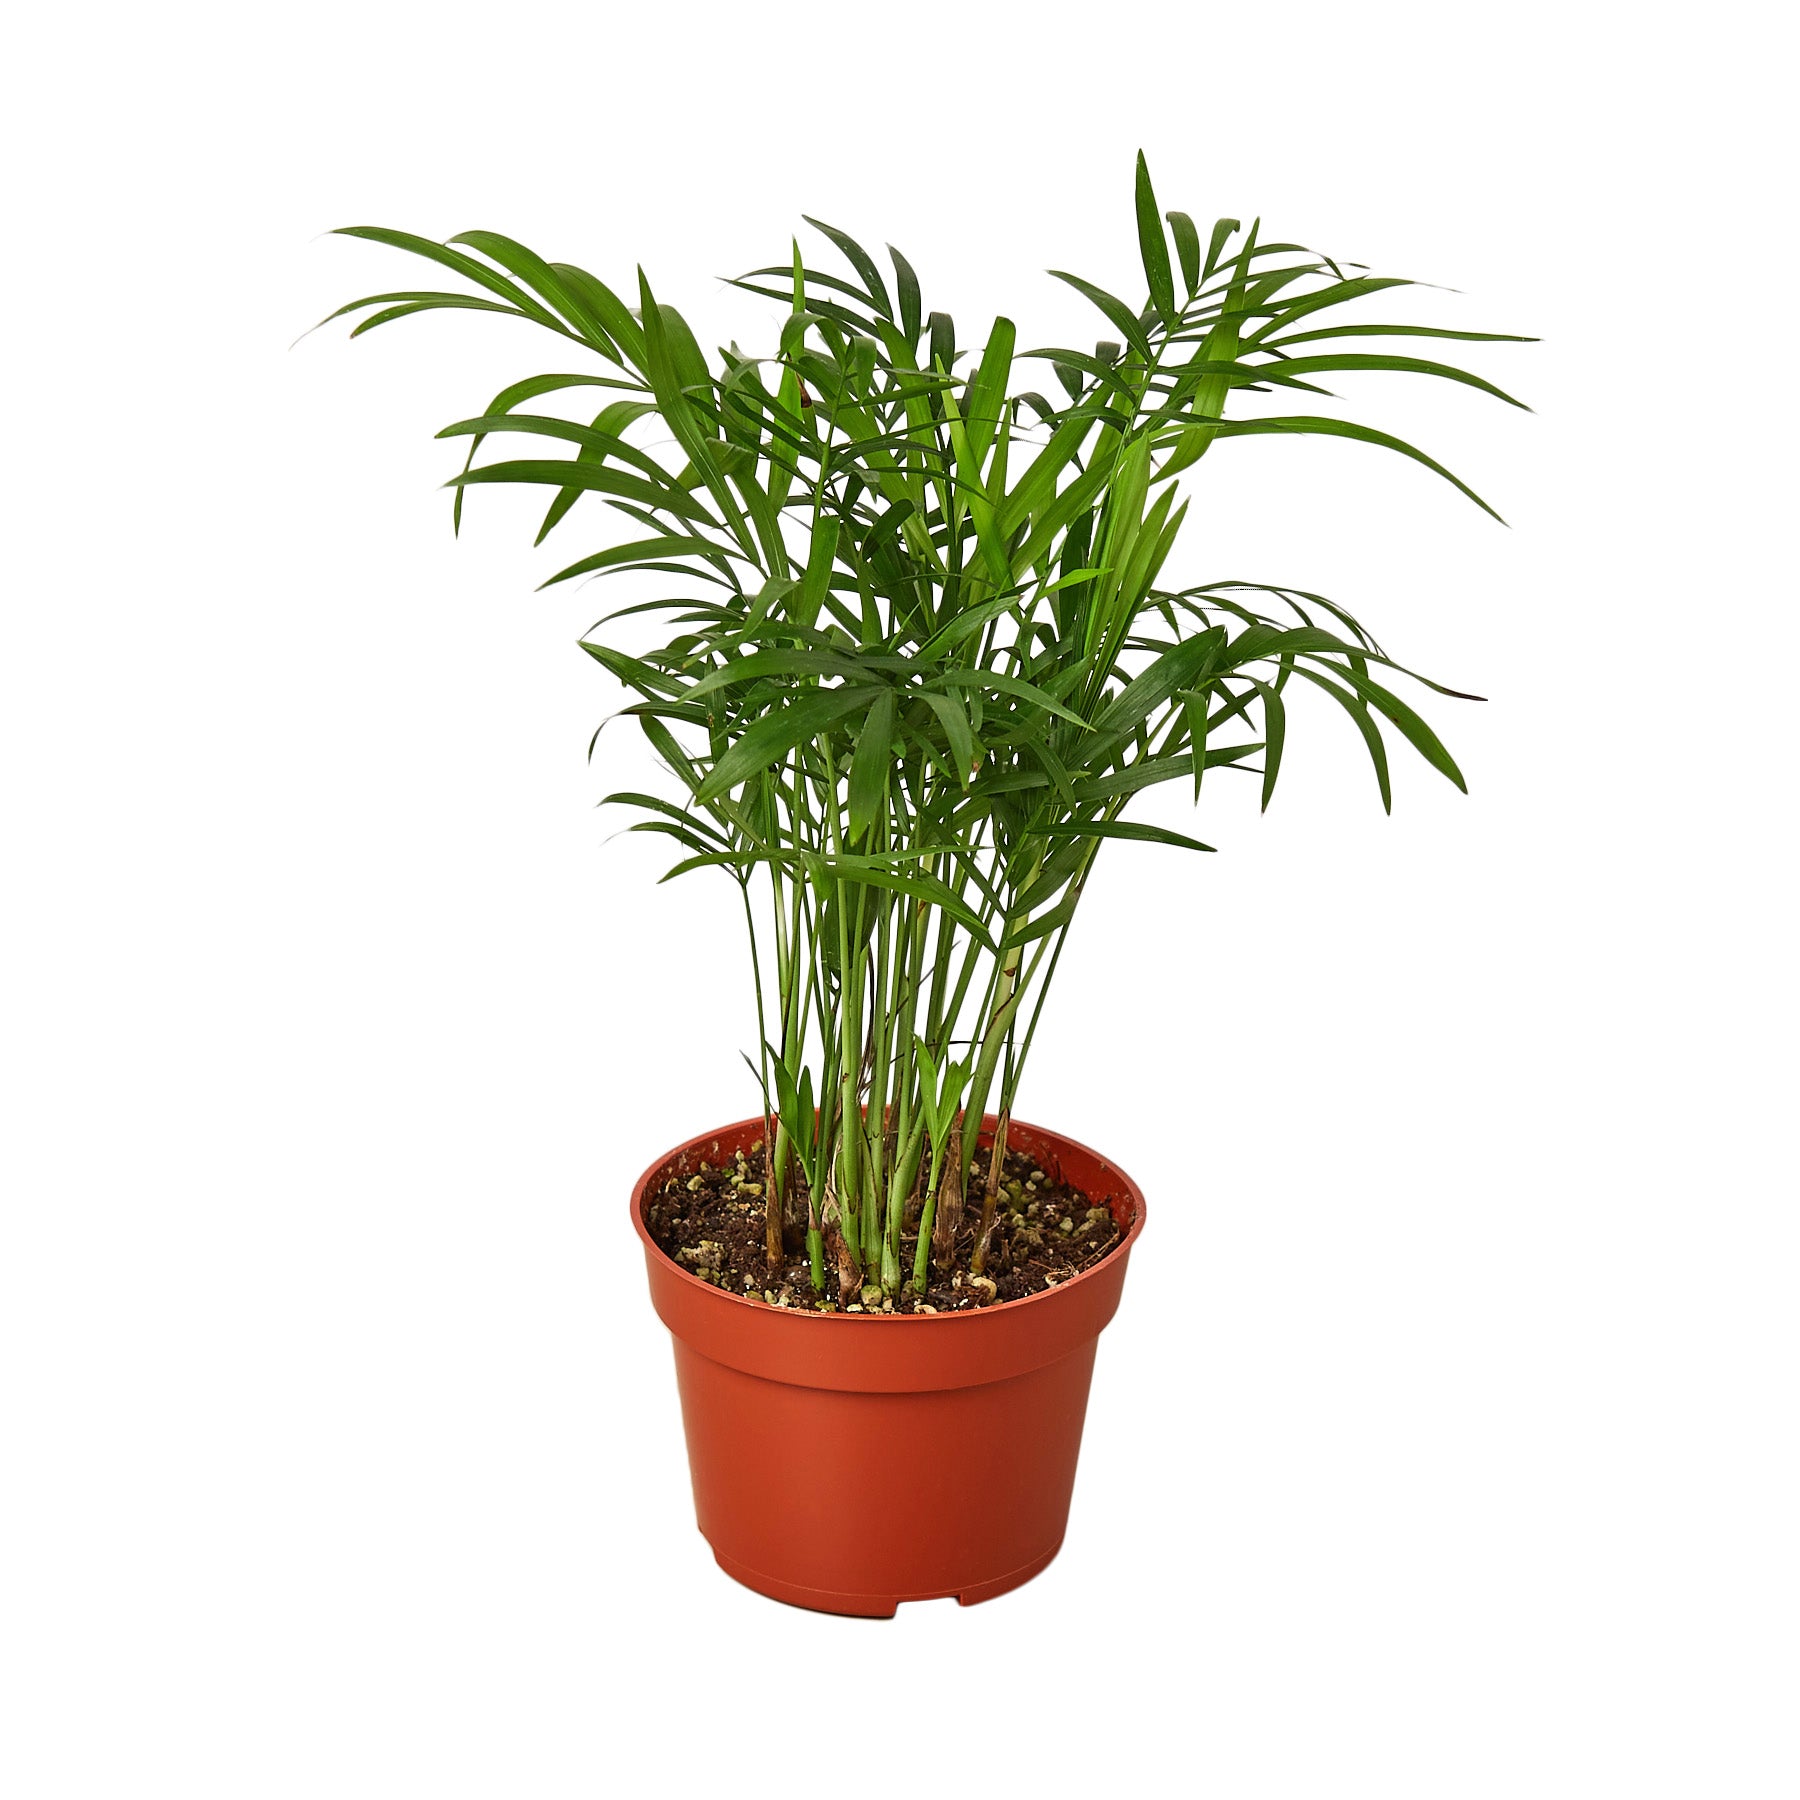 A palm tree in a pot on a white background available at a garden center near me.